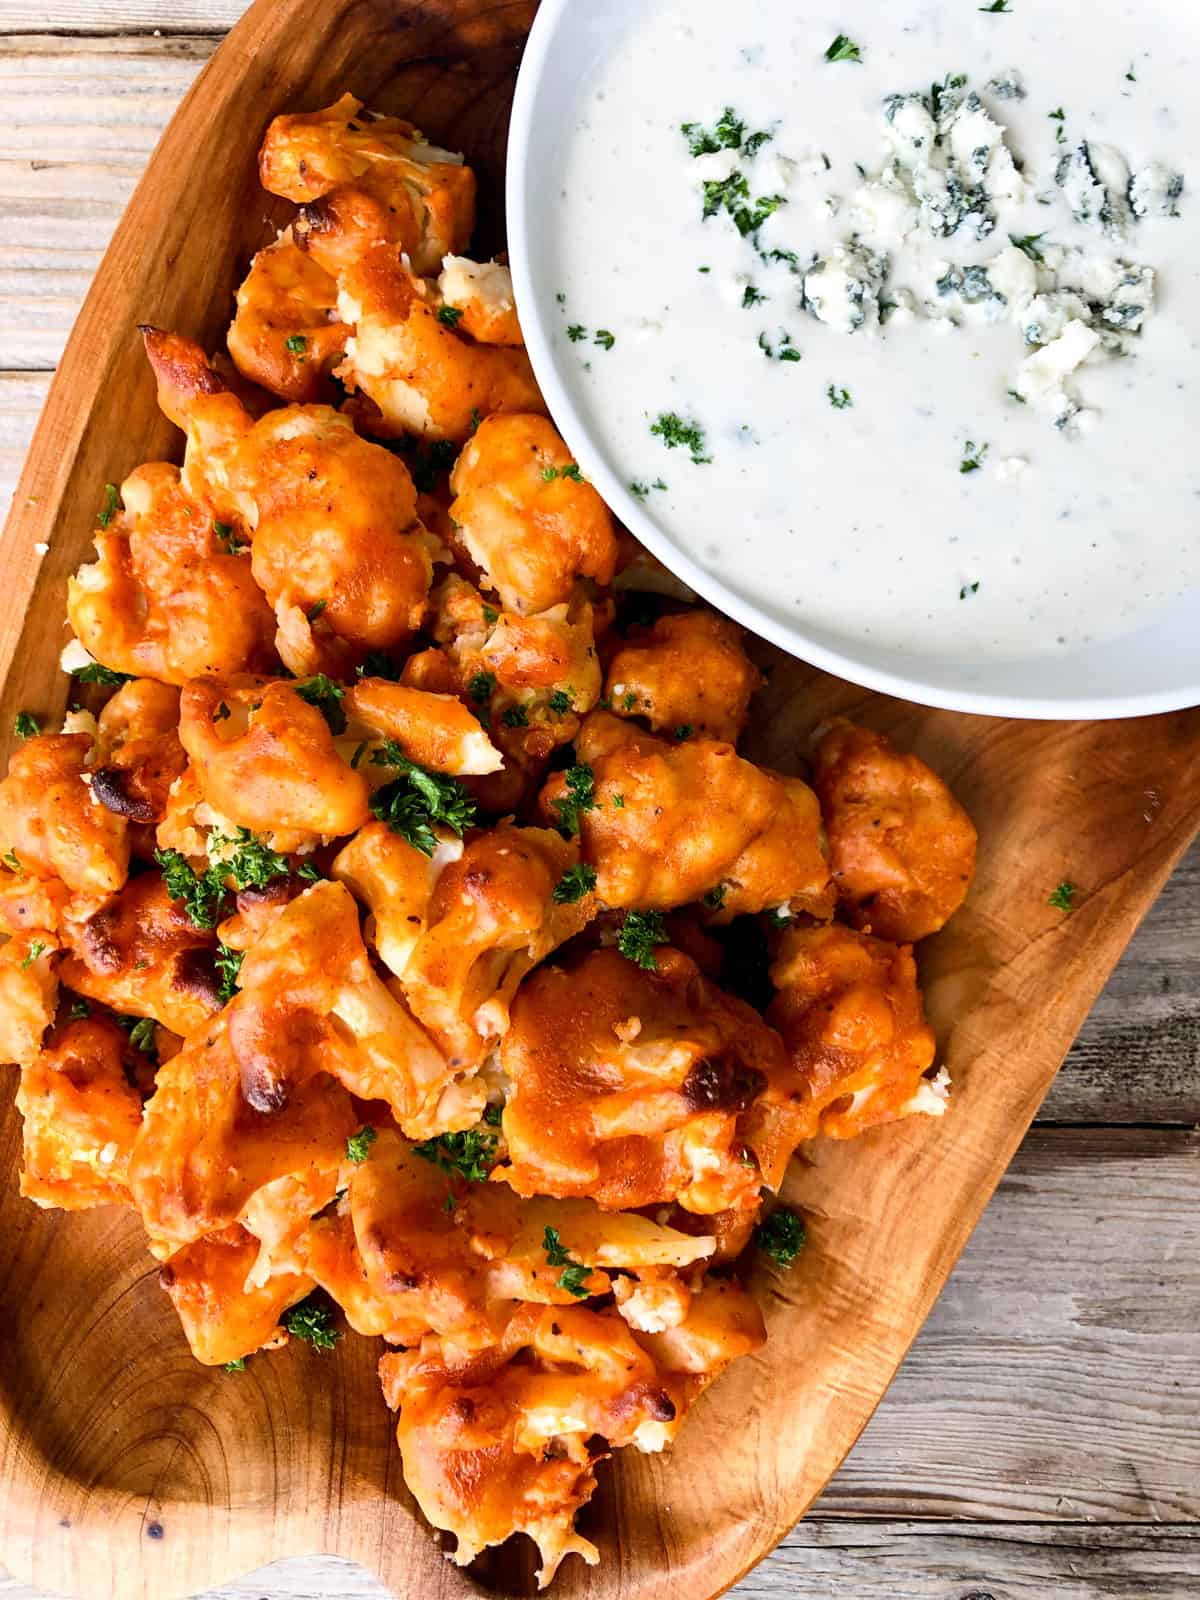 Dust the finished Buffalo Cauliflower with finely chopped parsley and serve with a blue cheese dip.